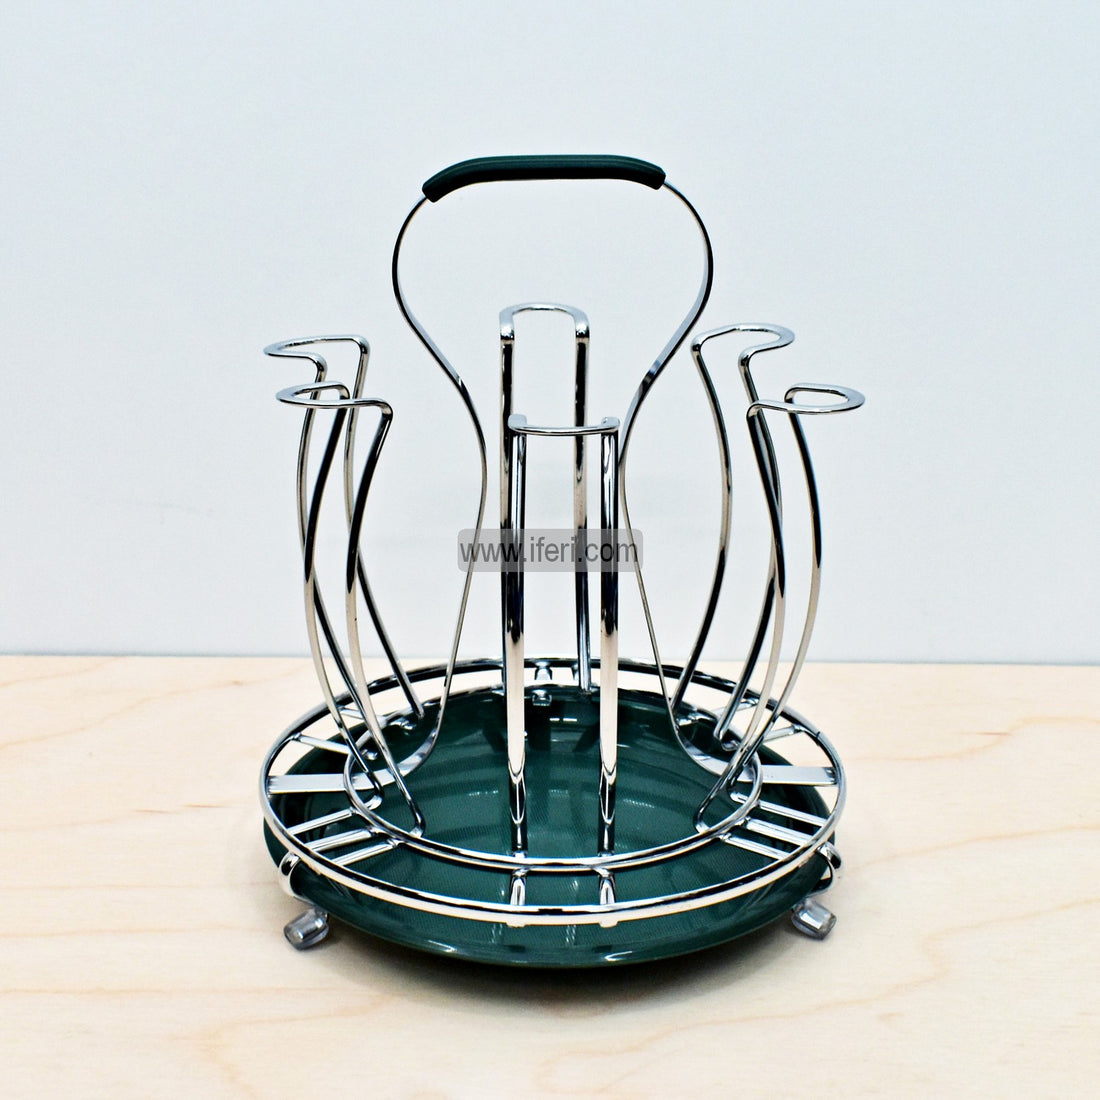 Buy Metal Glass Stand through online from iferi.com in Bangladesh